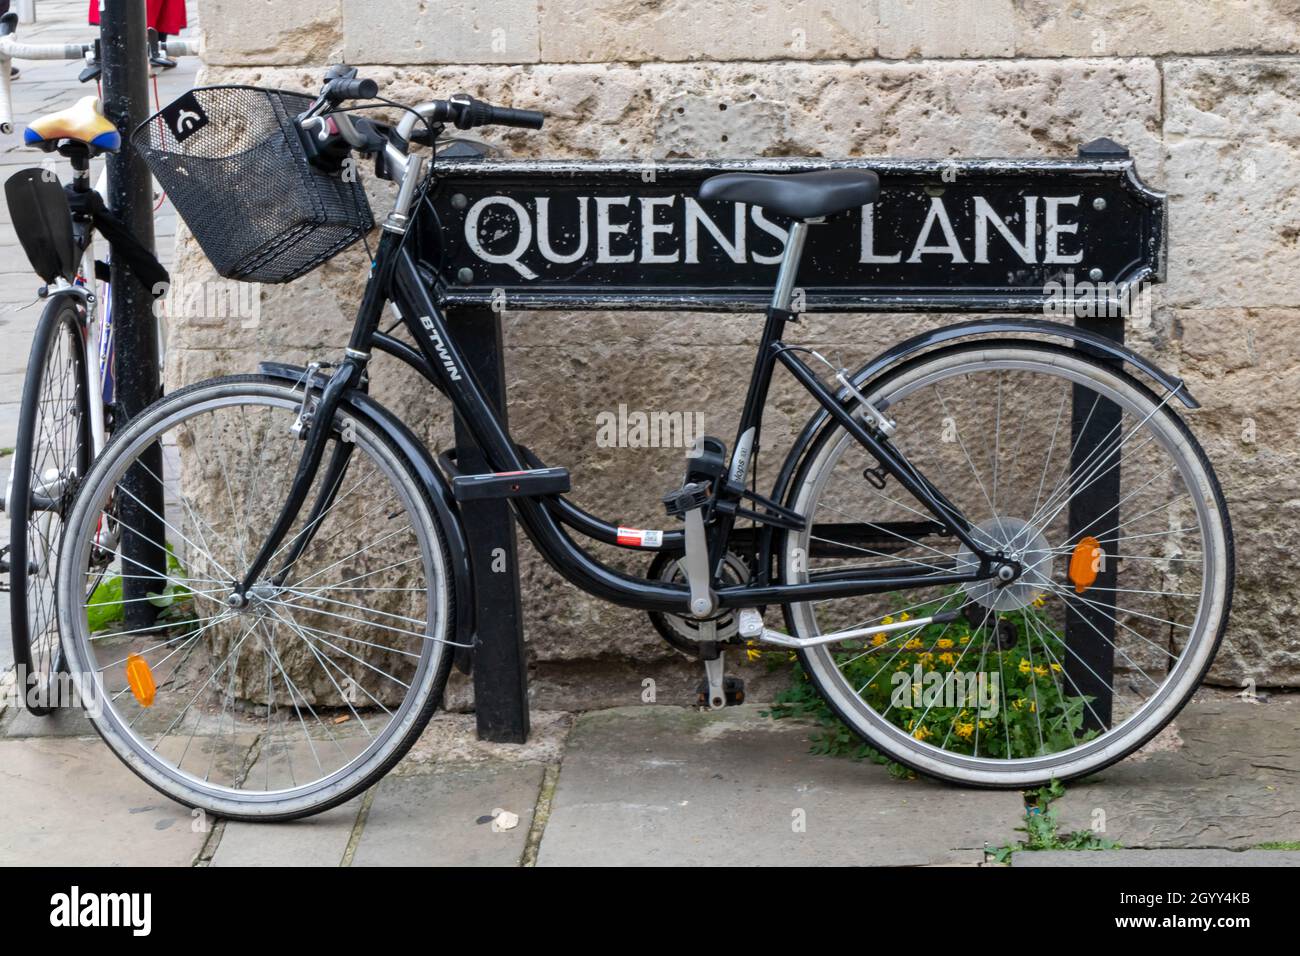 Bicycle locked to the street sign for Queen's Lane, Oxford, England, UK Stock Photo